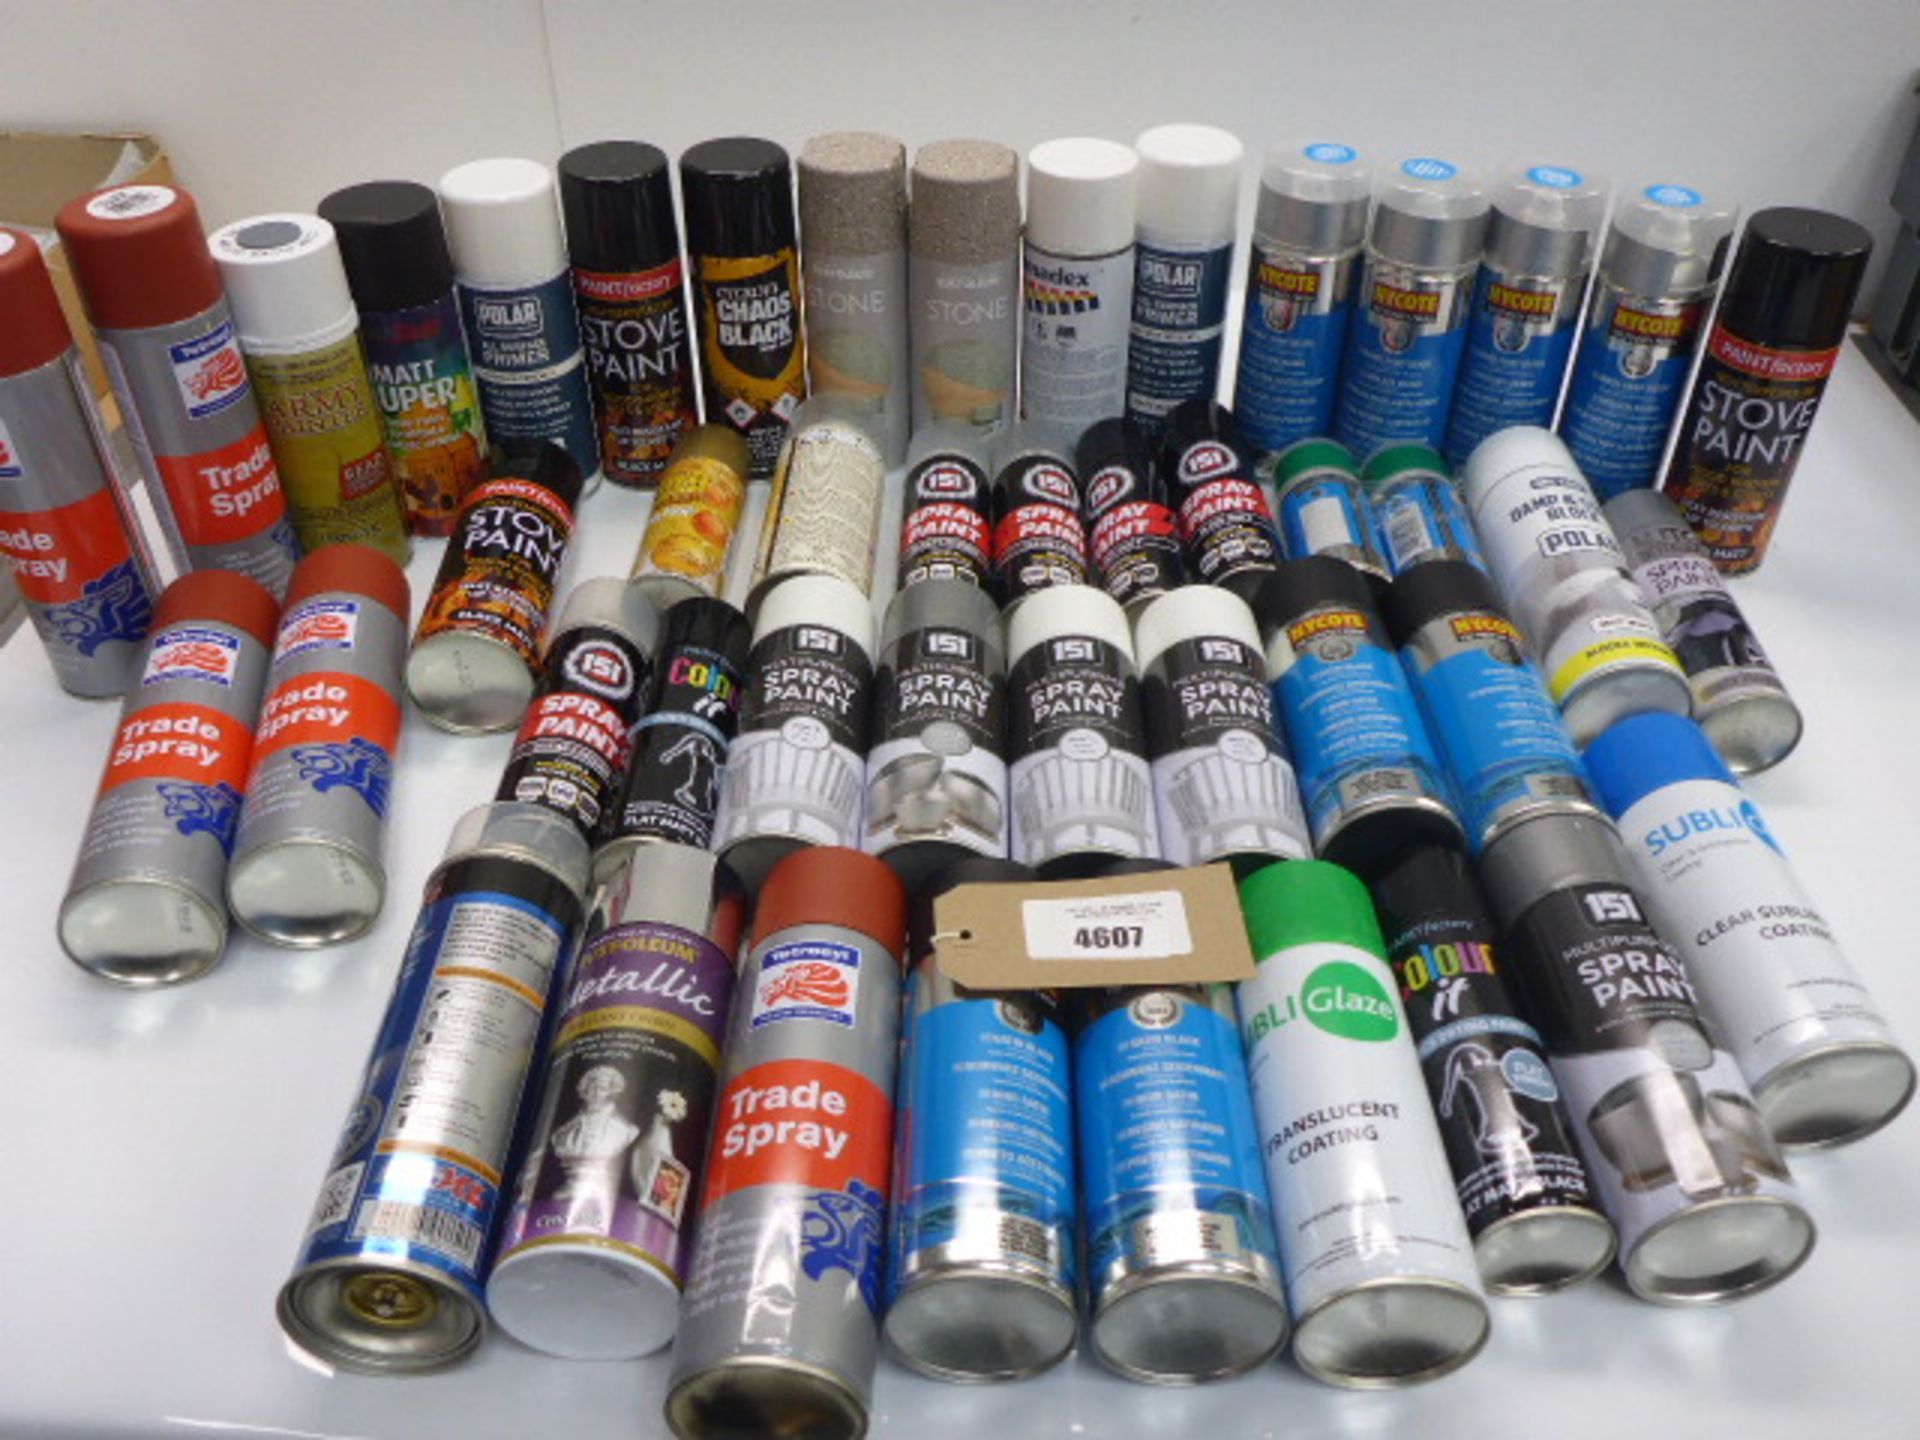 Large bag of metal, wood, stove & model spray paints in various colours